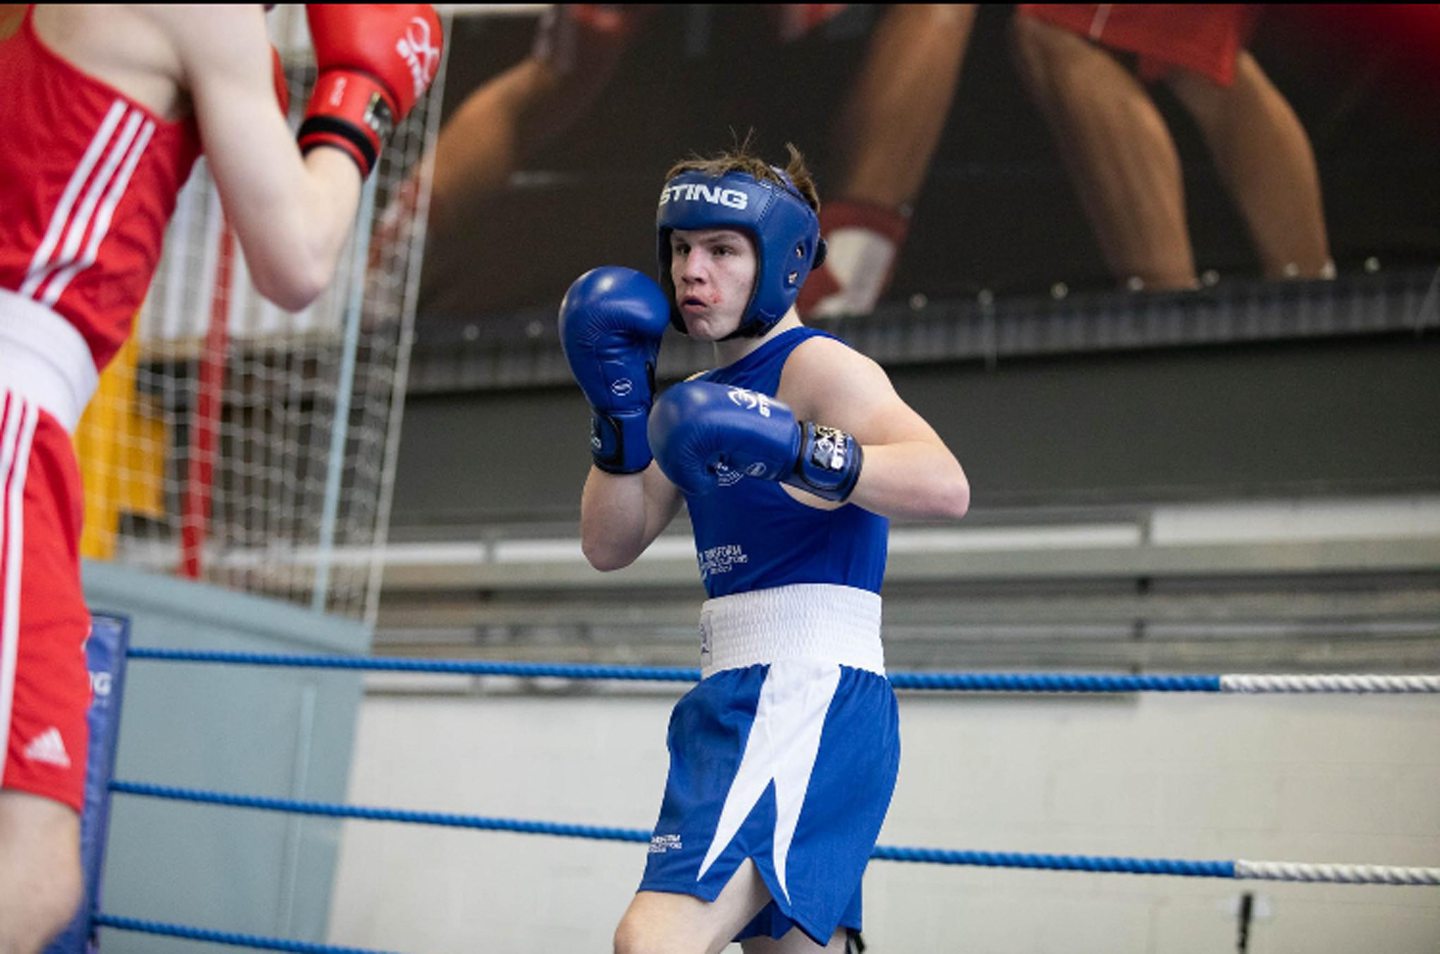 Granite City ABC boxer Kai Stitchell in action during the Golden Gloves final. Image: Boxing Scotland 